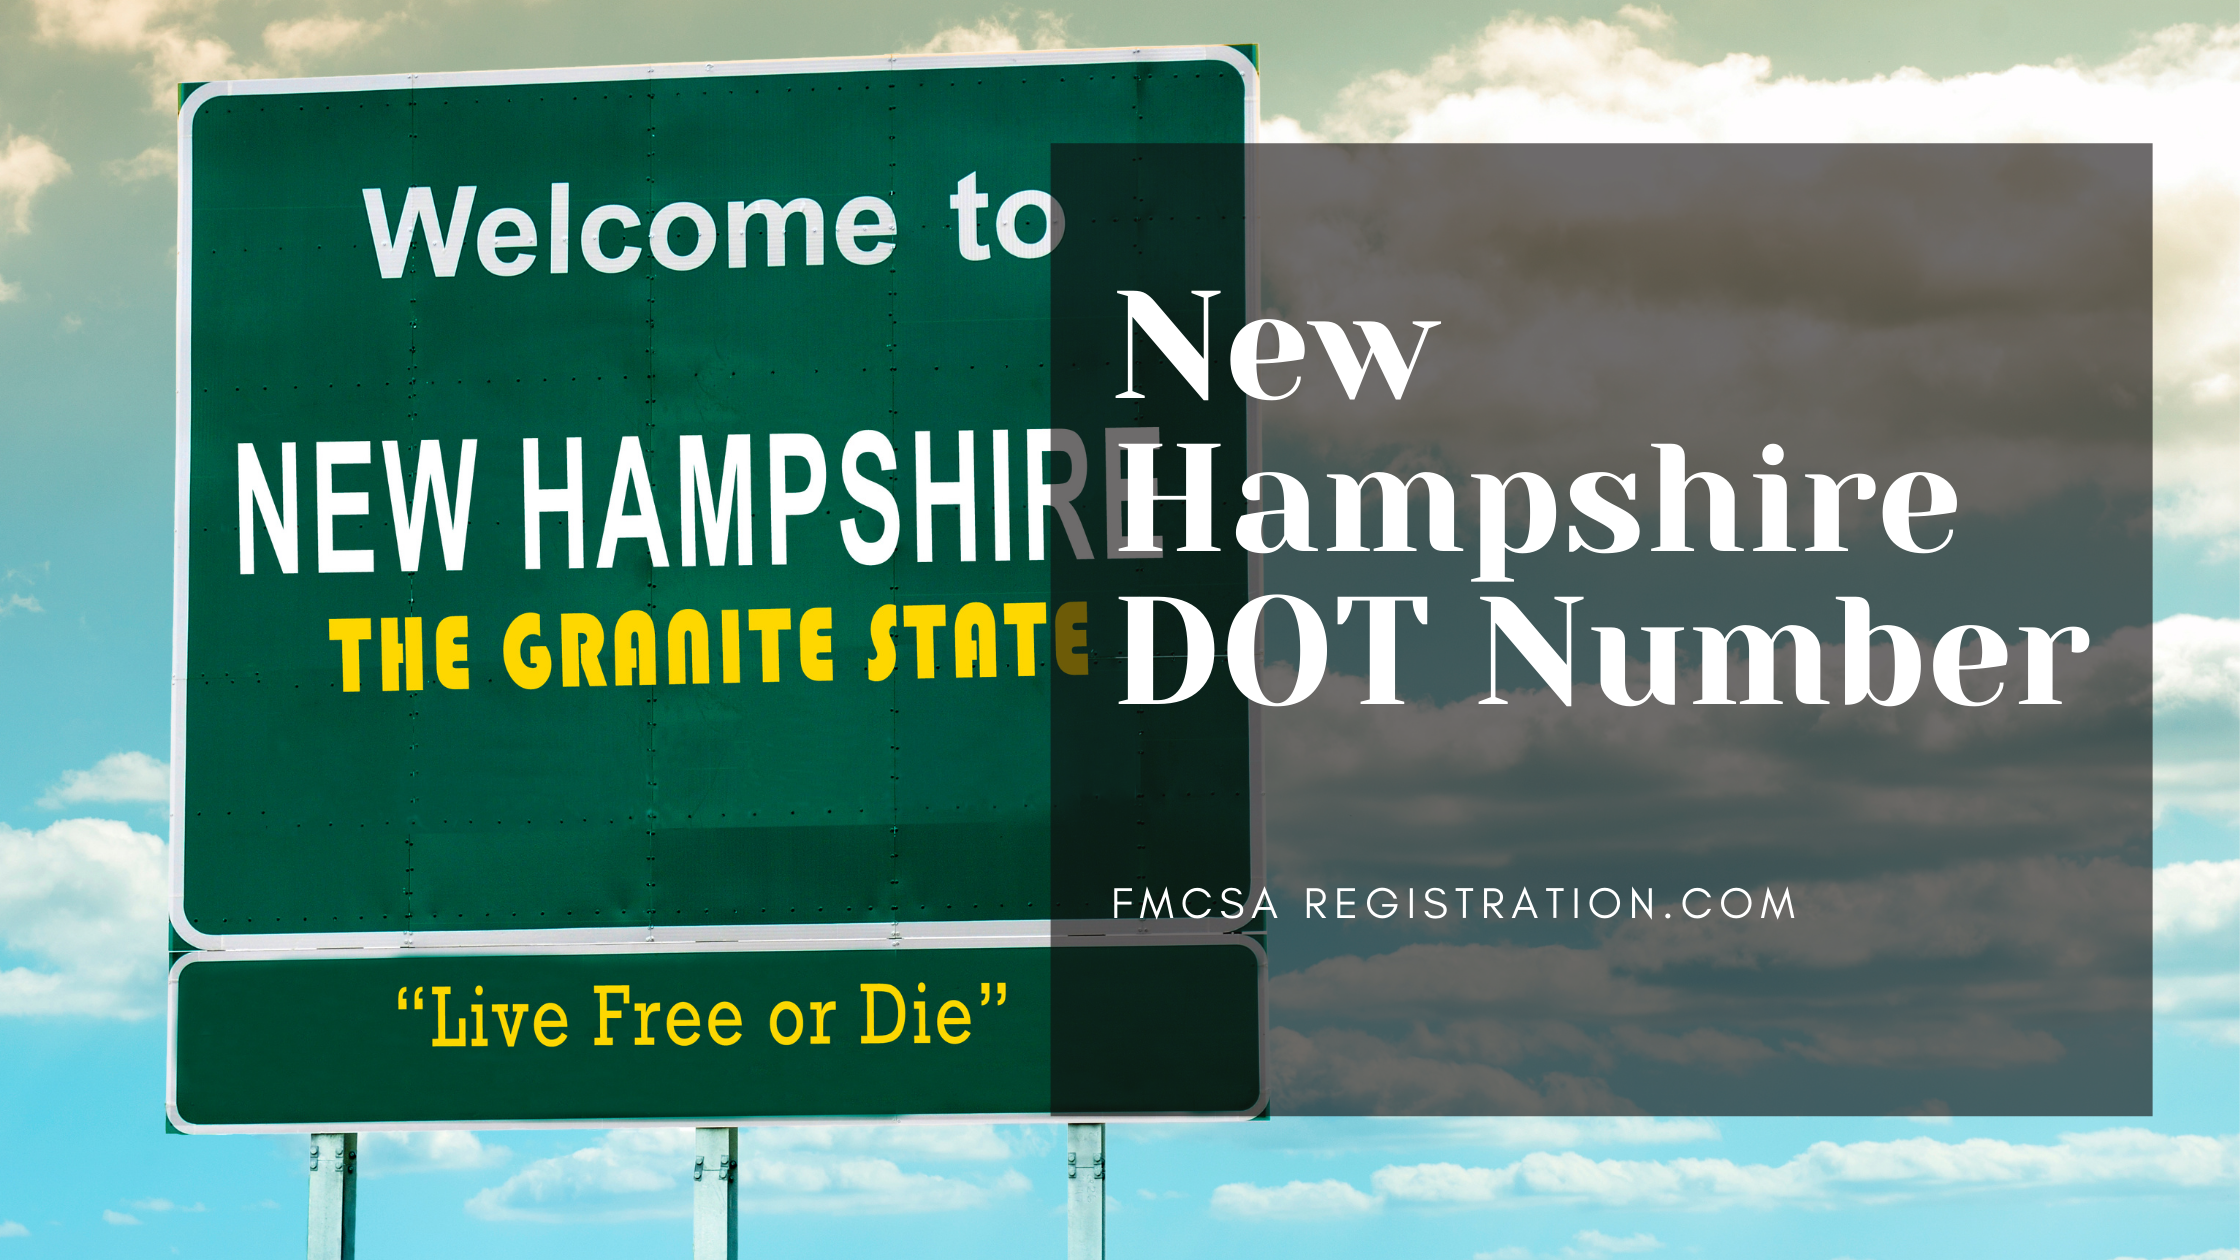 New Hampshire DOT Number product image reference 1